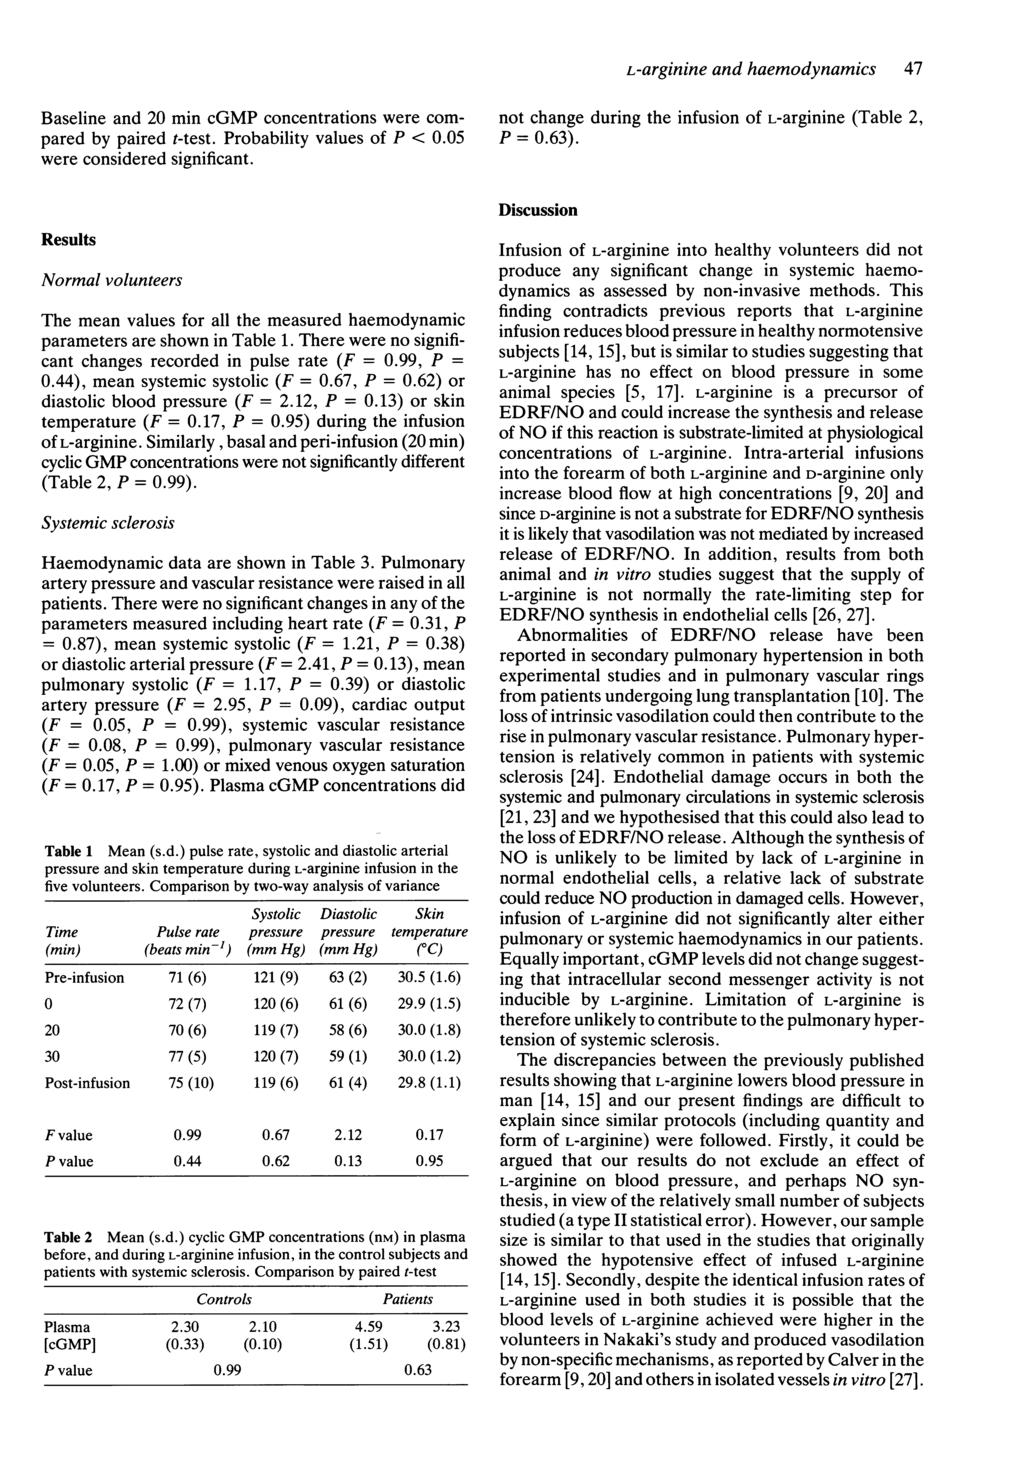 L-arginine and haemodynamics 47 Baseline and 20 min cgmp concentrations were compared by paired t-test. Probability values of P < 0.05 were considered significant.